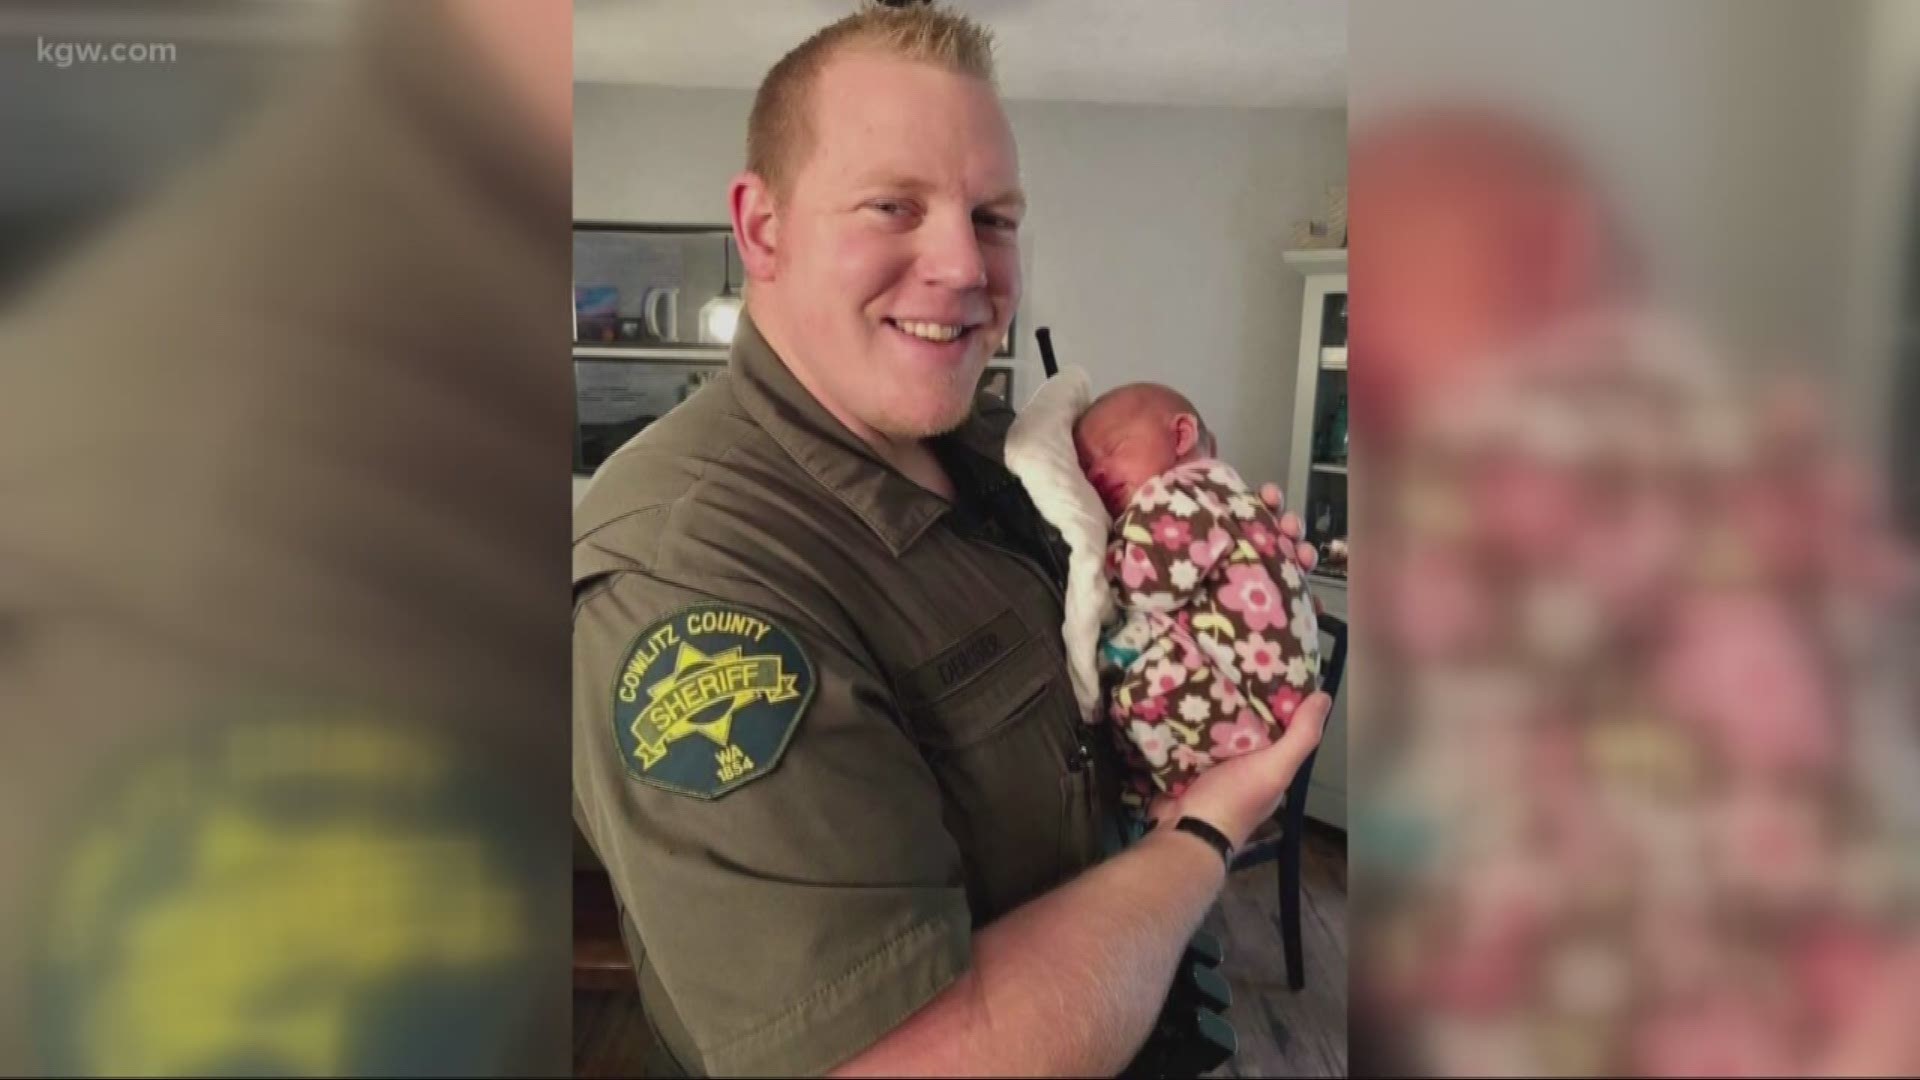 Businesses throughout Southwest Washington are stepping up to raise money for the family of Deputy Justin Derosier, who was gunned down last Saturday.